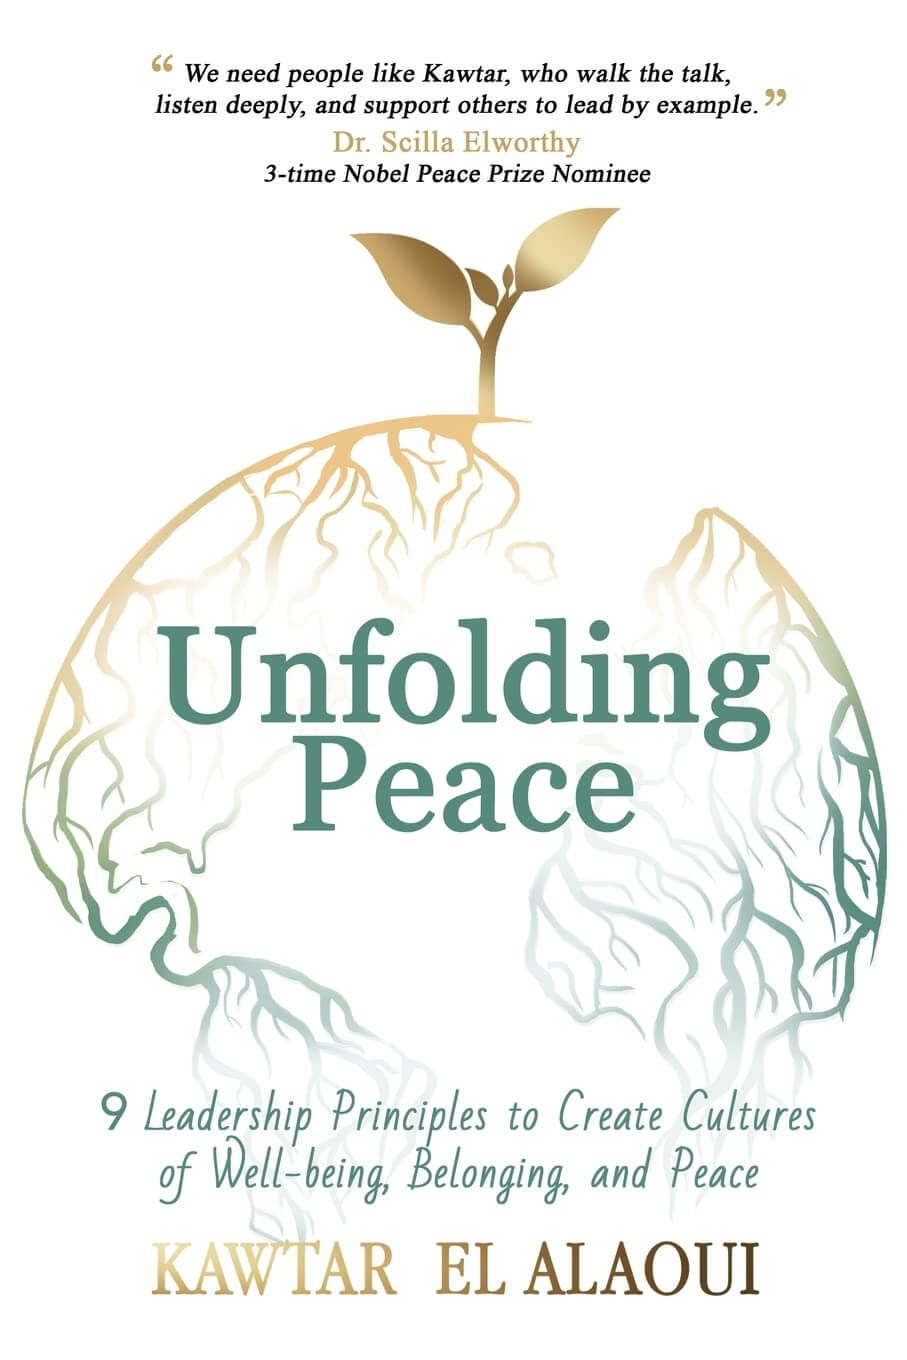 Unfolding Peace, 9 leadership principles to create cultures of well-being, belonging and peace